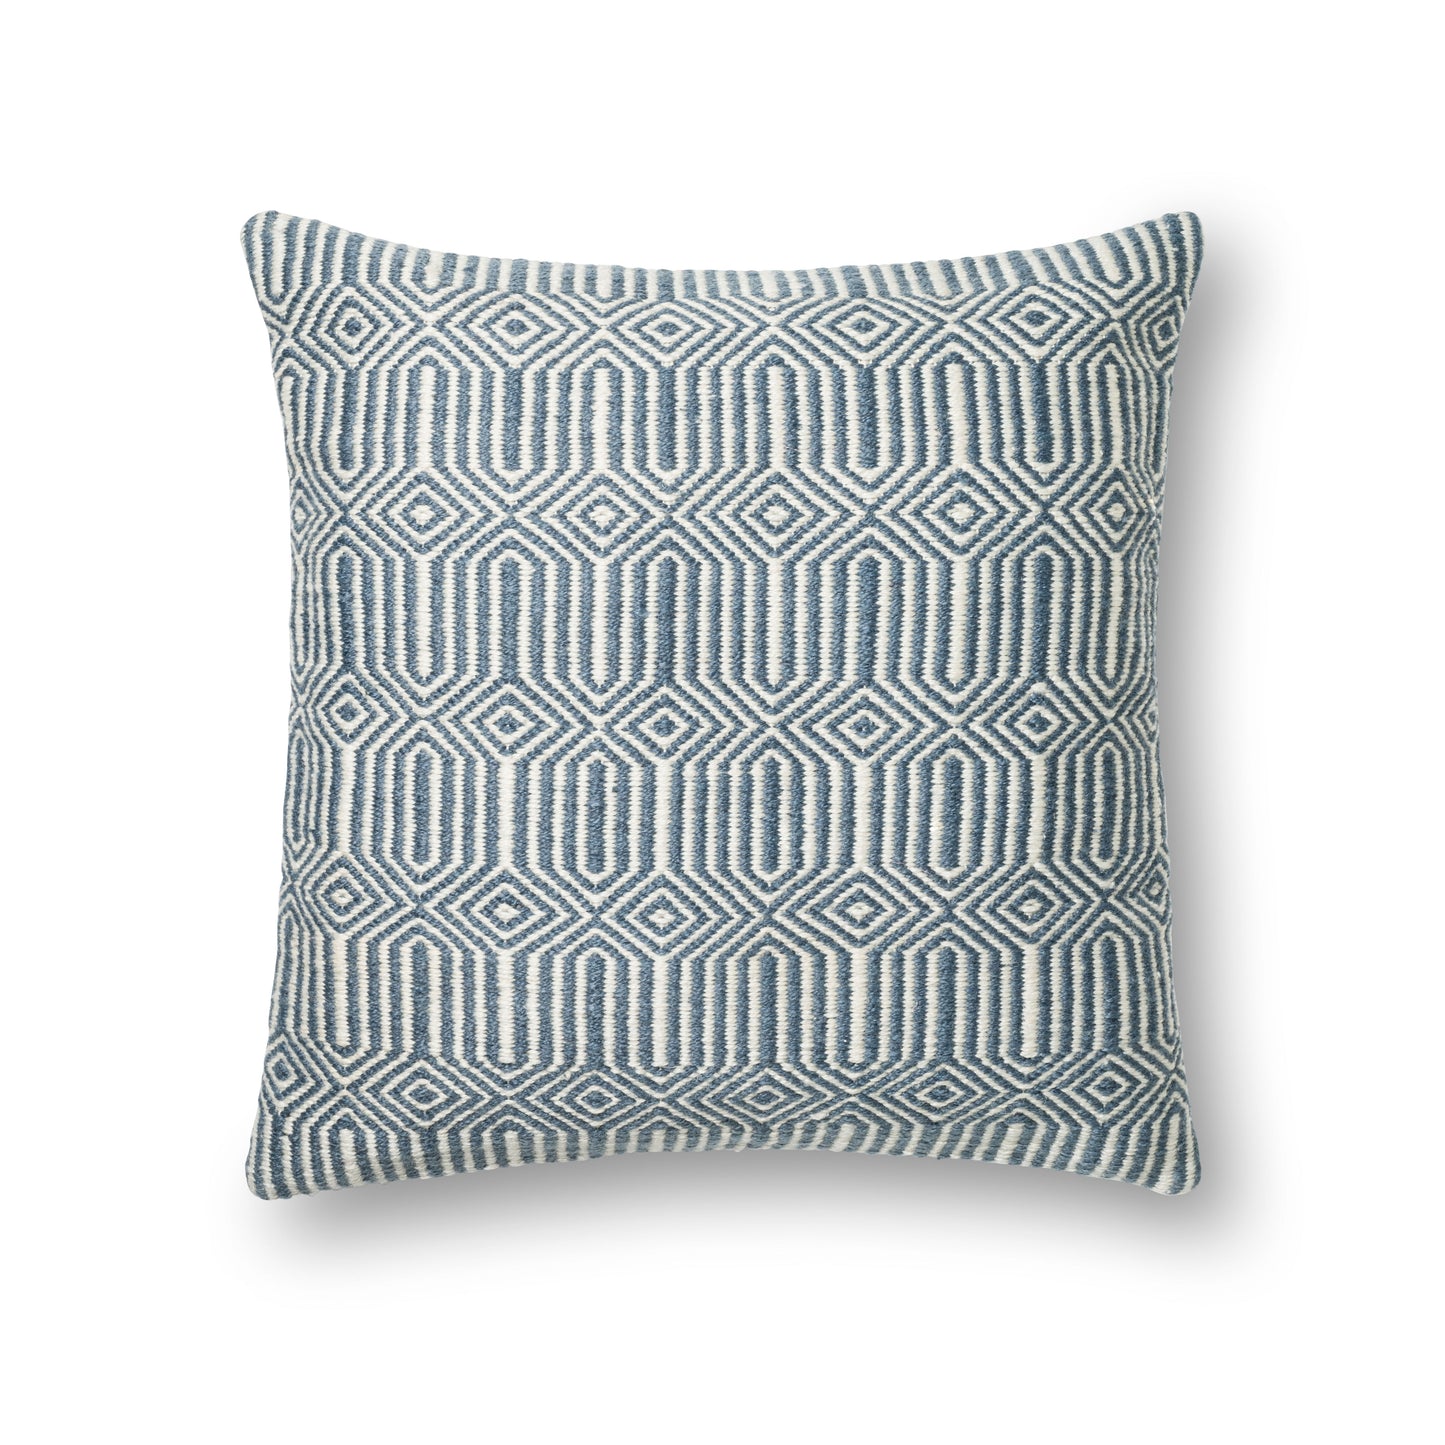 Photo of a pillow;  P0339 Blue / Ivory 22" x 22" Cover w/Poly Pillow